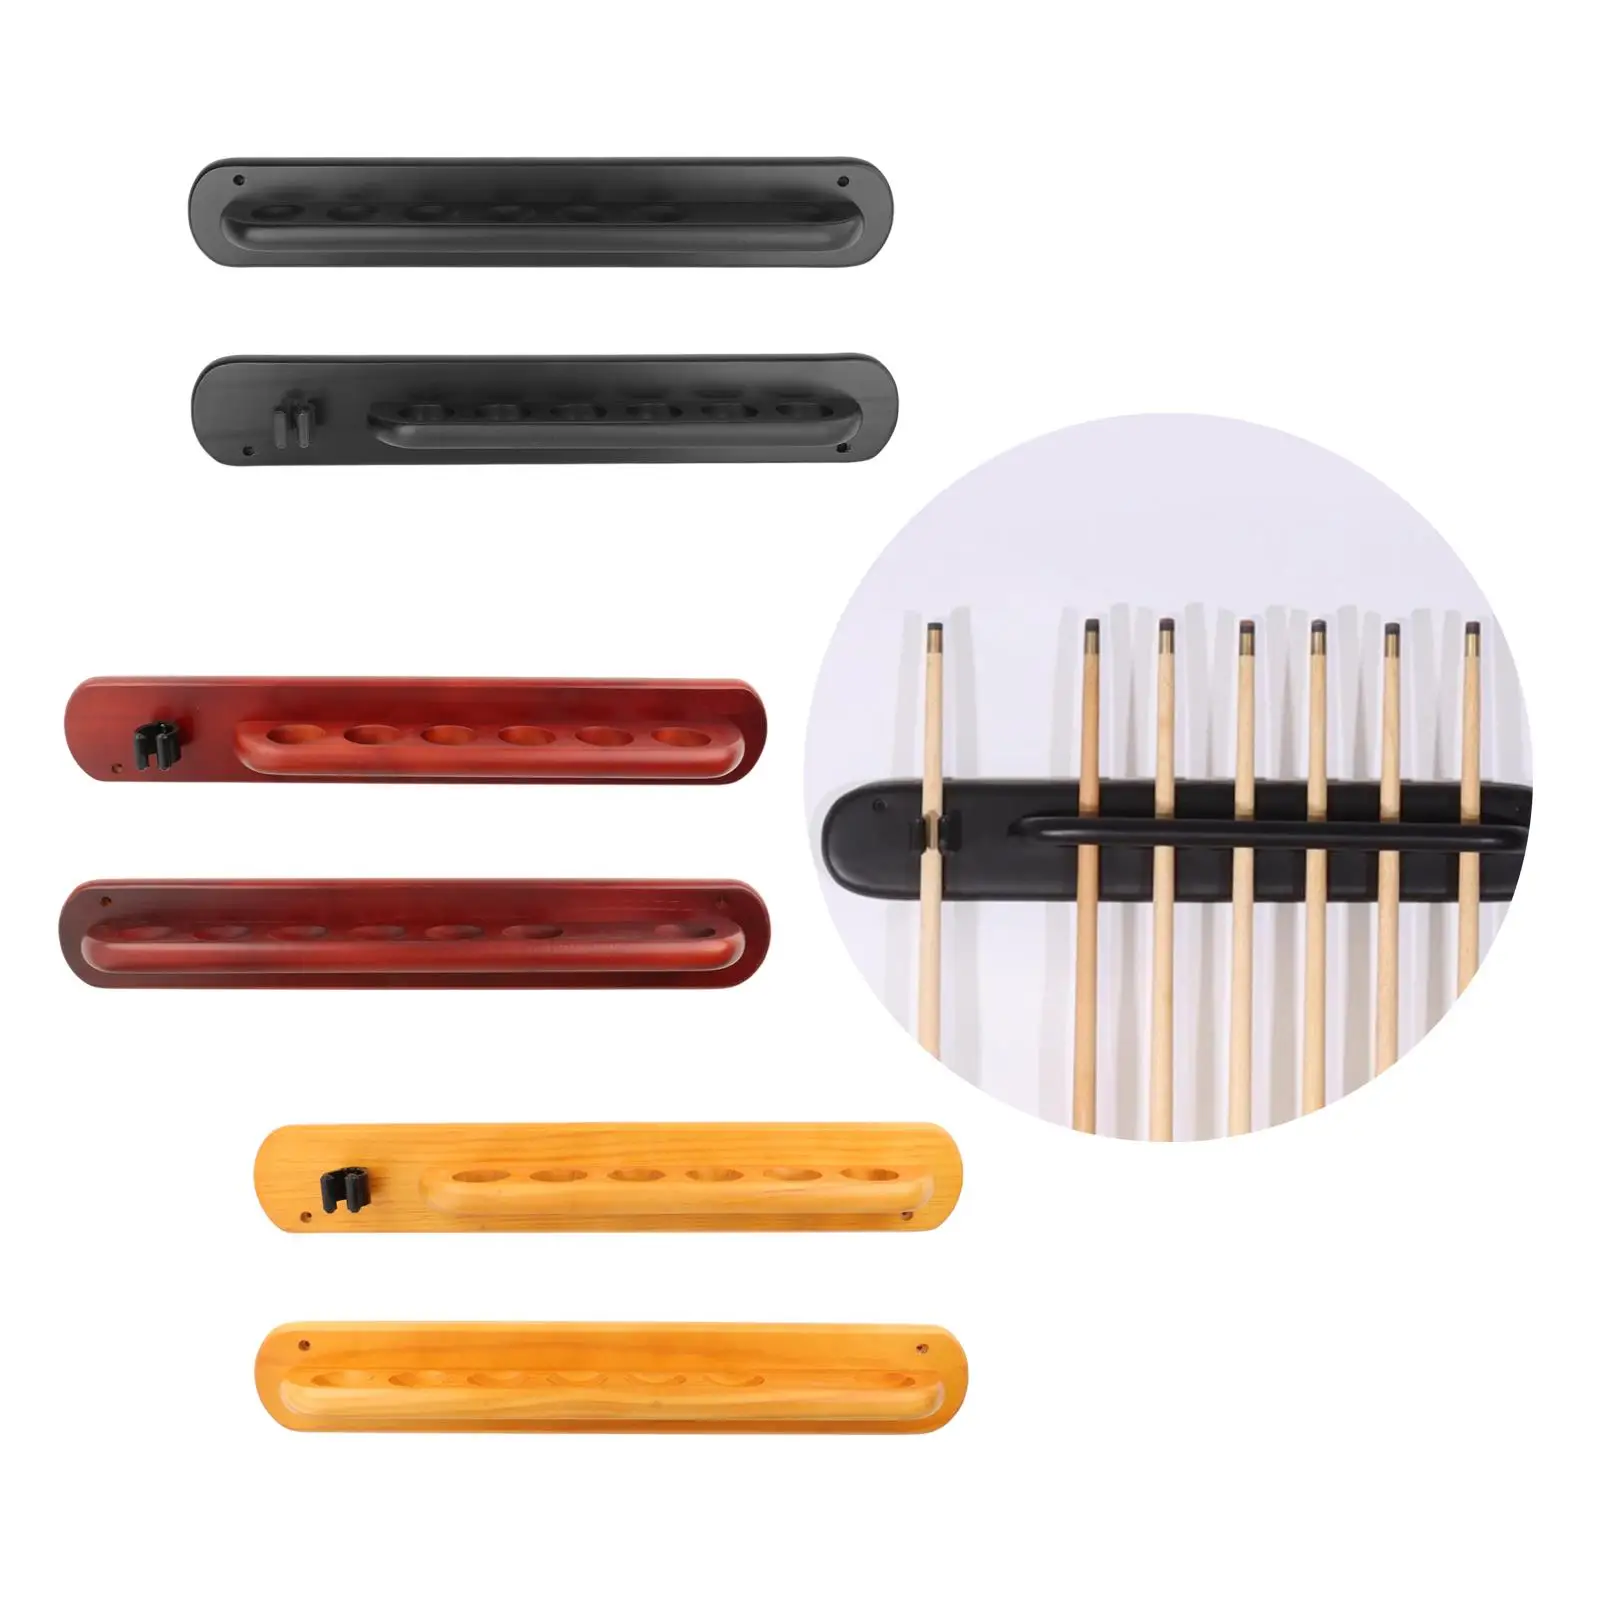 Pool Cue Rack Pool Rod Holder Wall Mount Fishing Rod Stand Billiard Cue Rest Pool Cue Holder for Pool Cues Game Room Clubs